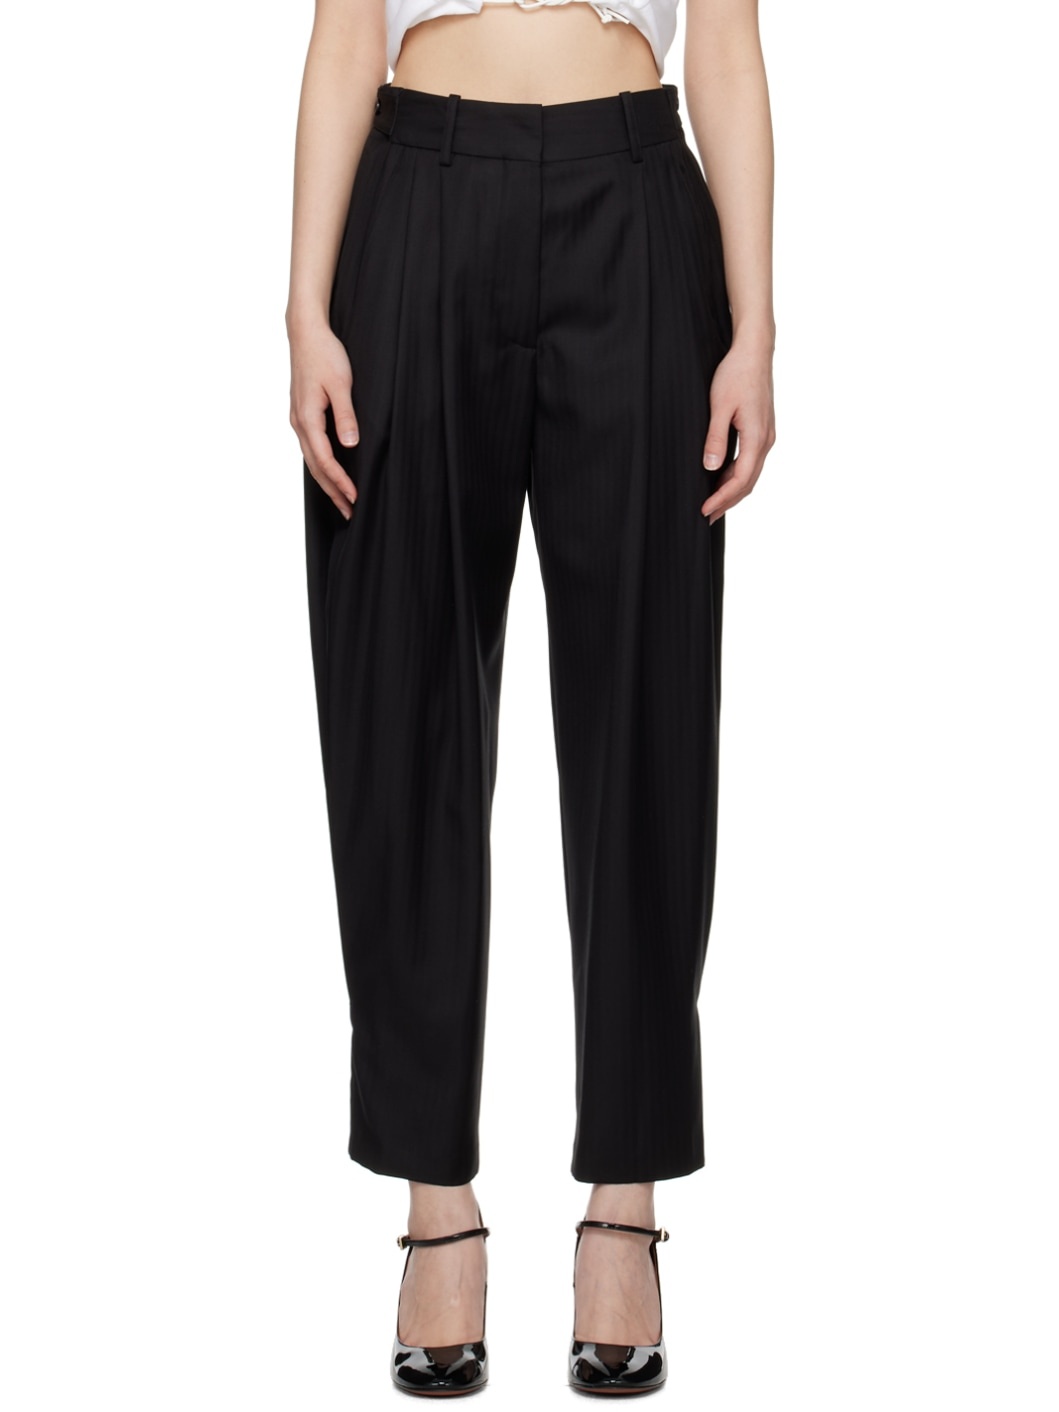 Black Loose Trousers - 1